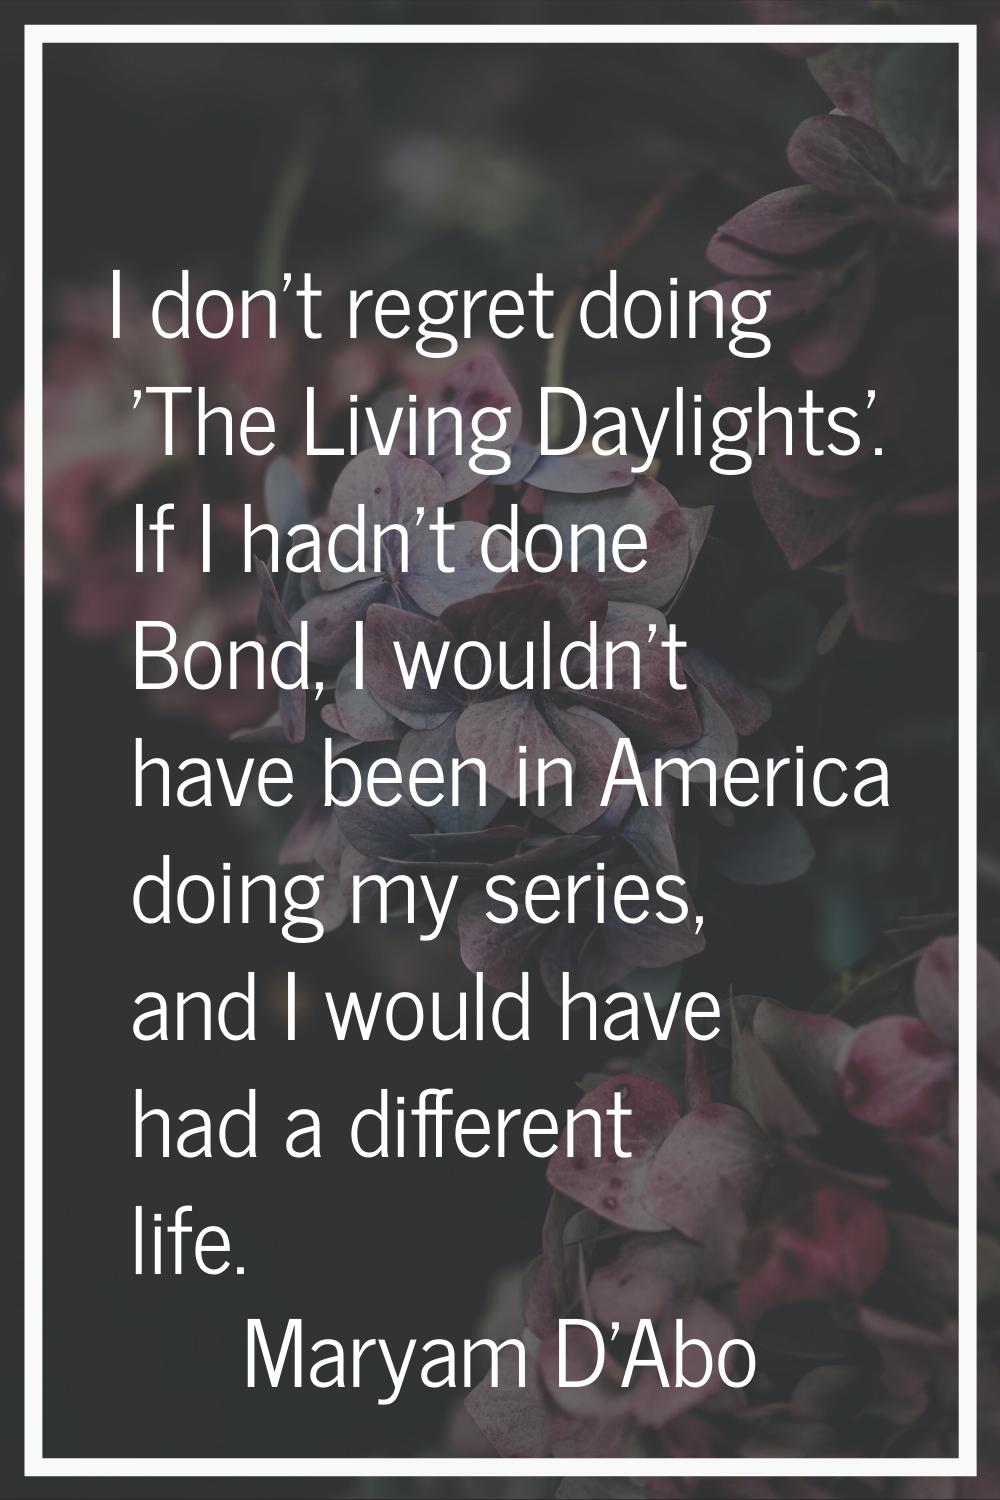 I don't regret doing 'The Living Daylights'. If I hadn't done Bond, I wouldn't have been in America